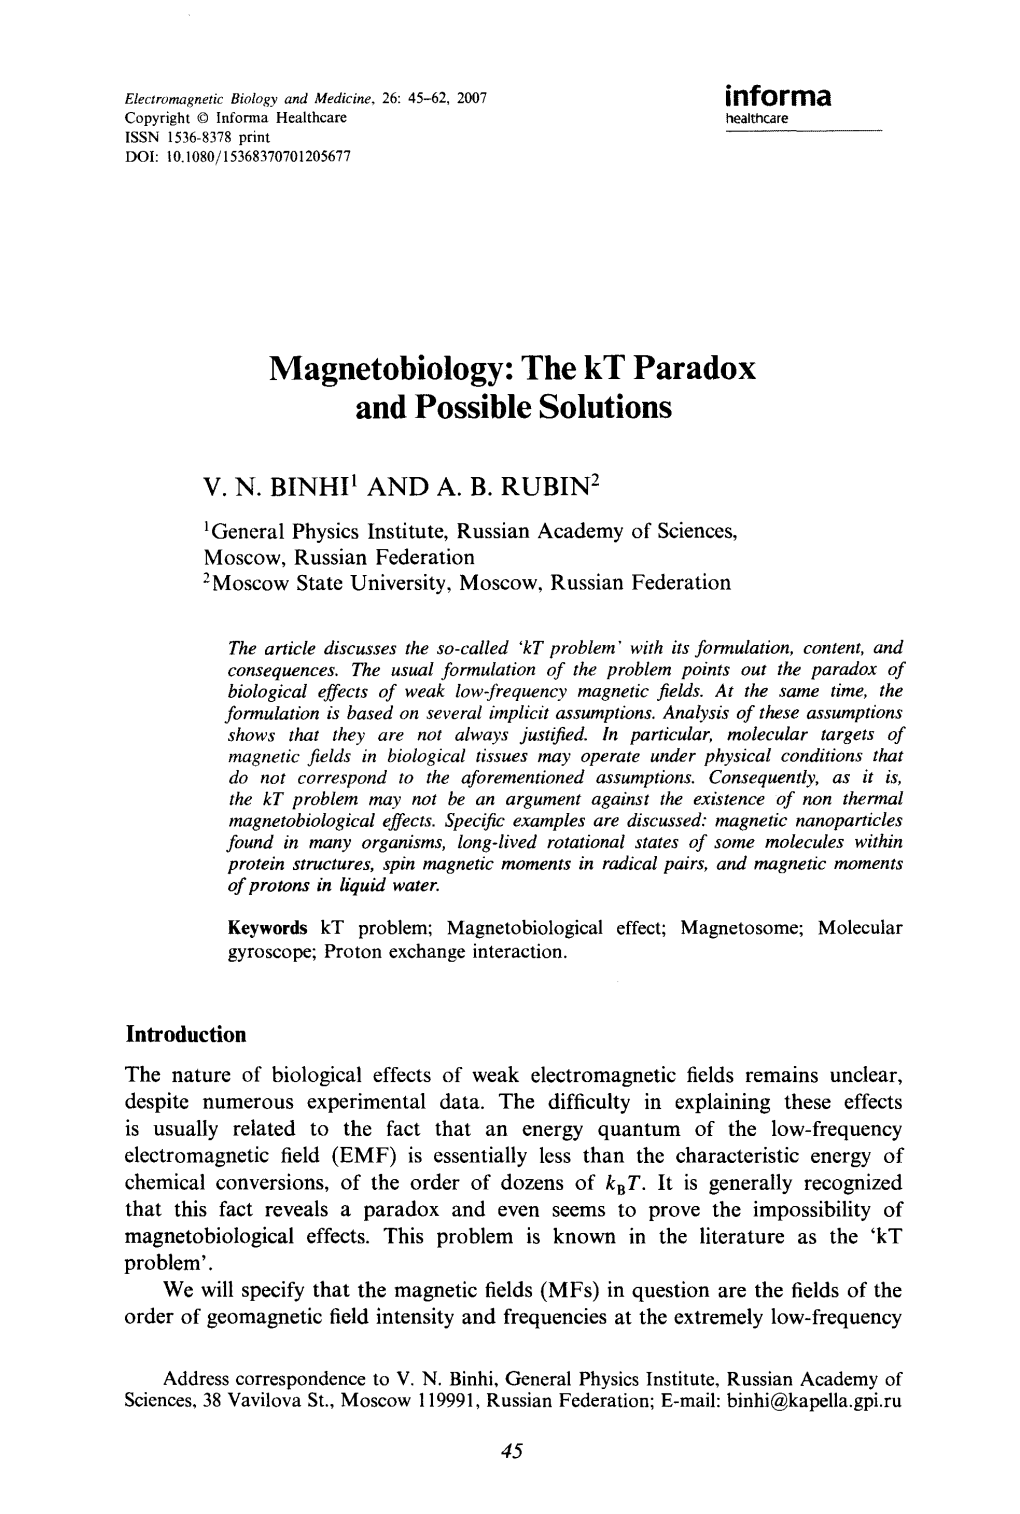 Magnetobiology: the Kt Paradox and Possible Solutions